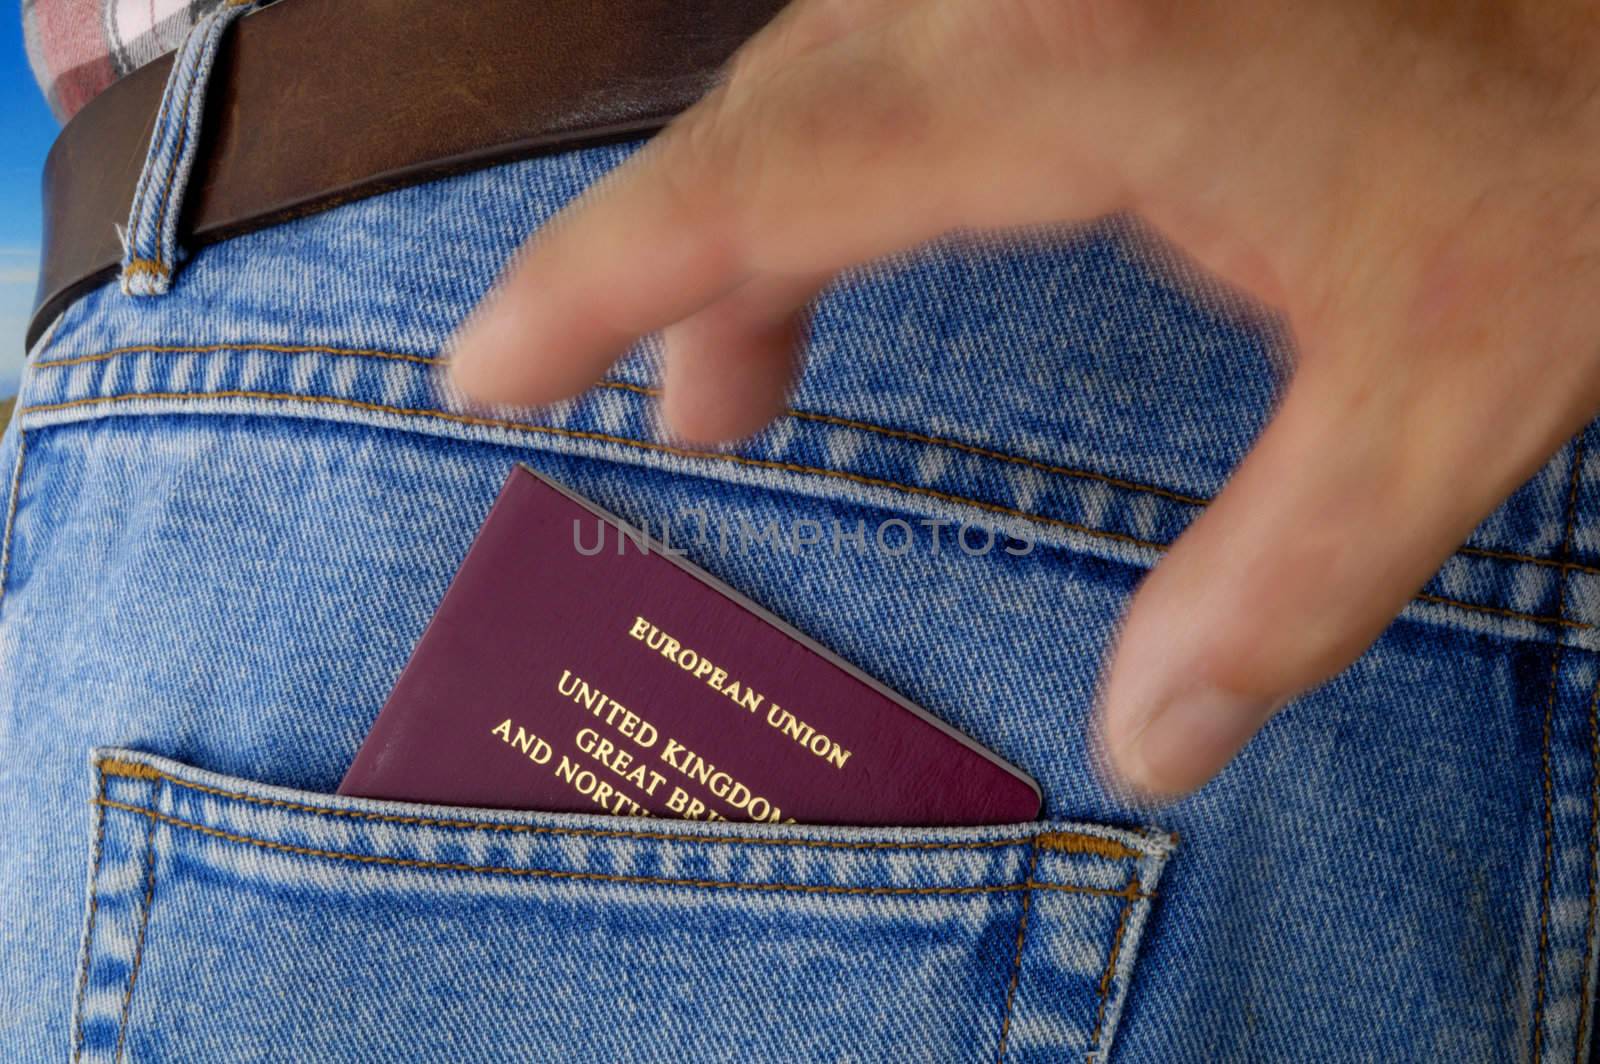 Pickpocket in action - Wallet and passport. by Bateleur